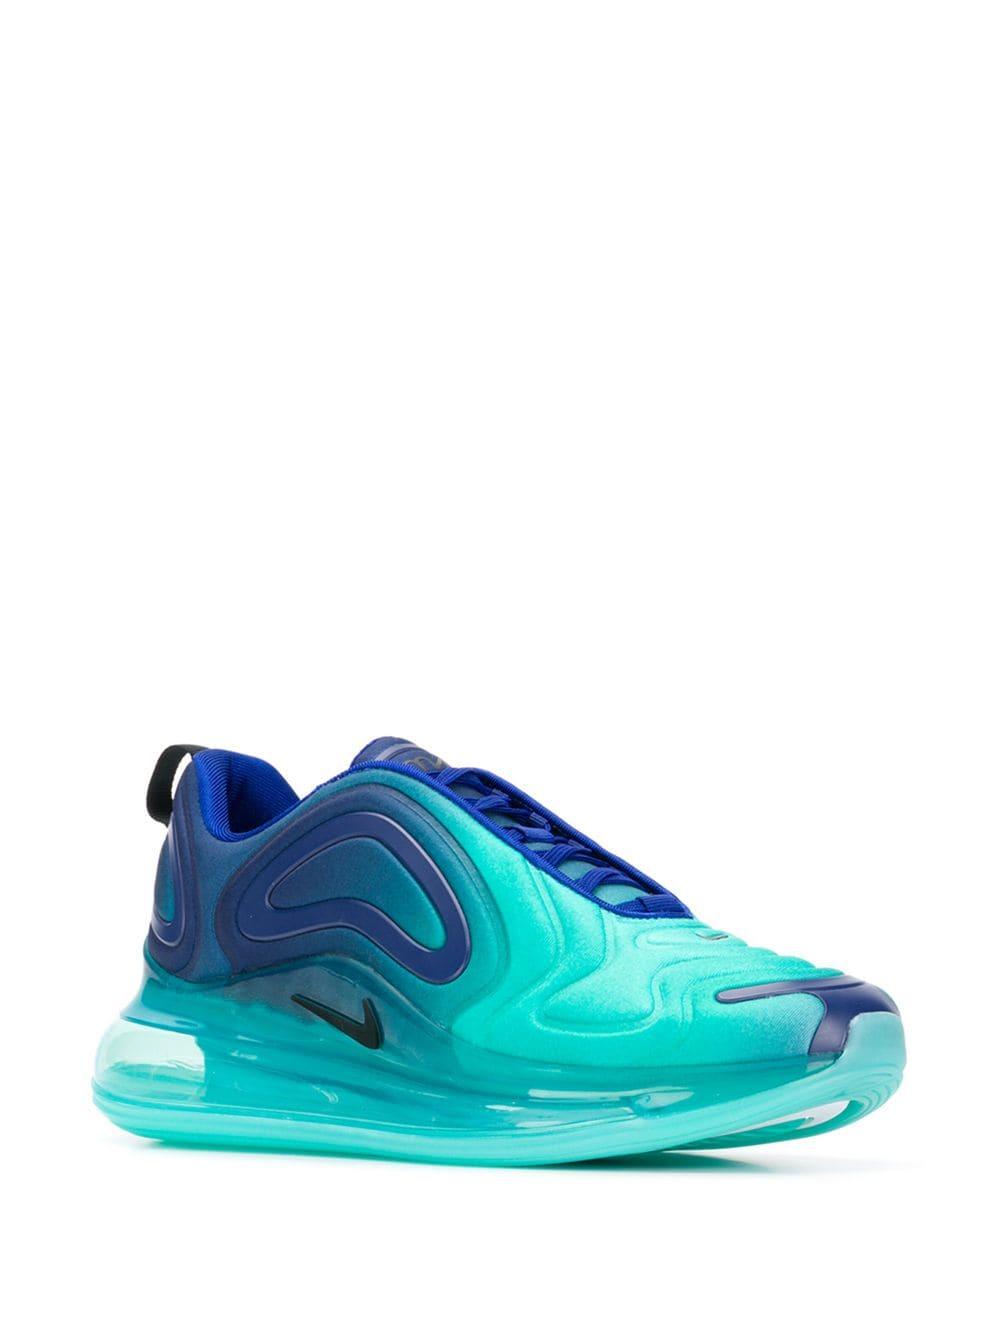 Nike Air Max 720 Trainers In Pink And Blue | islamiyyat.com